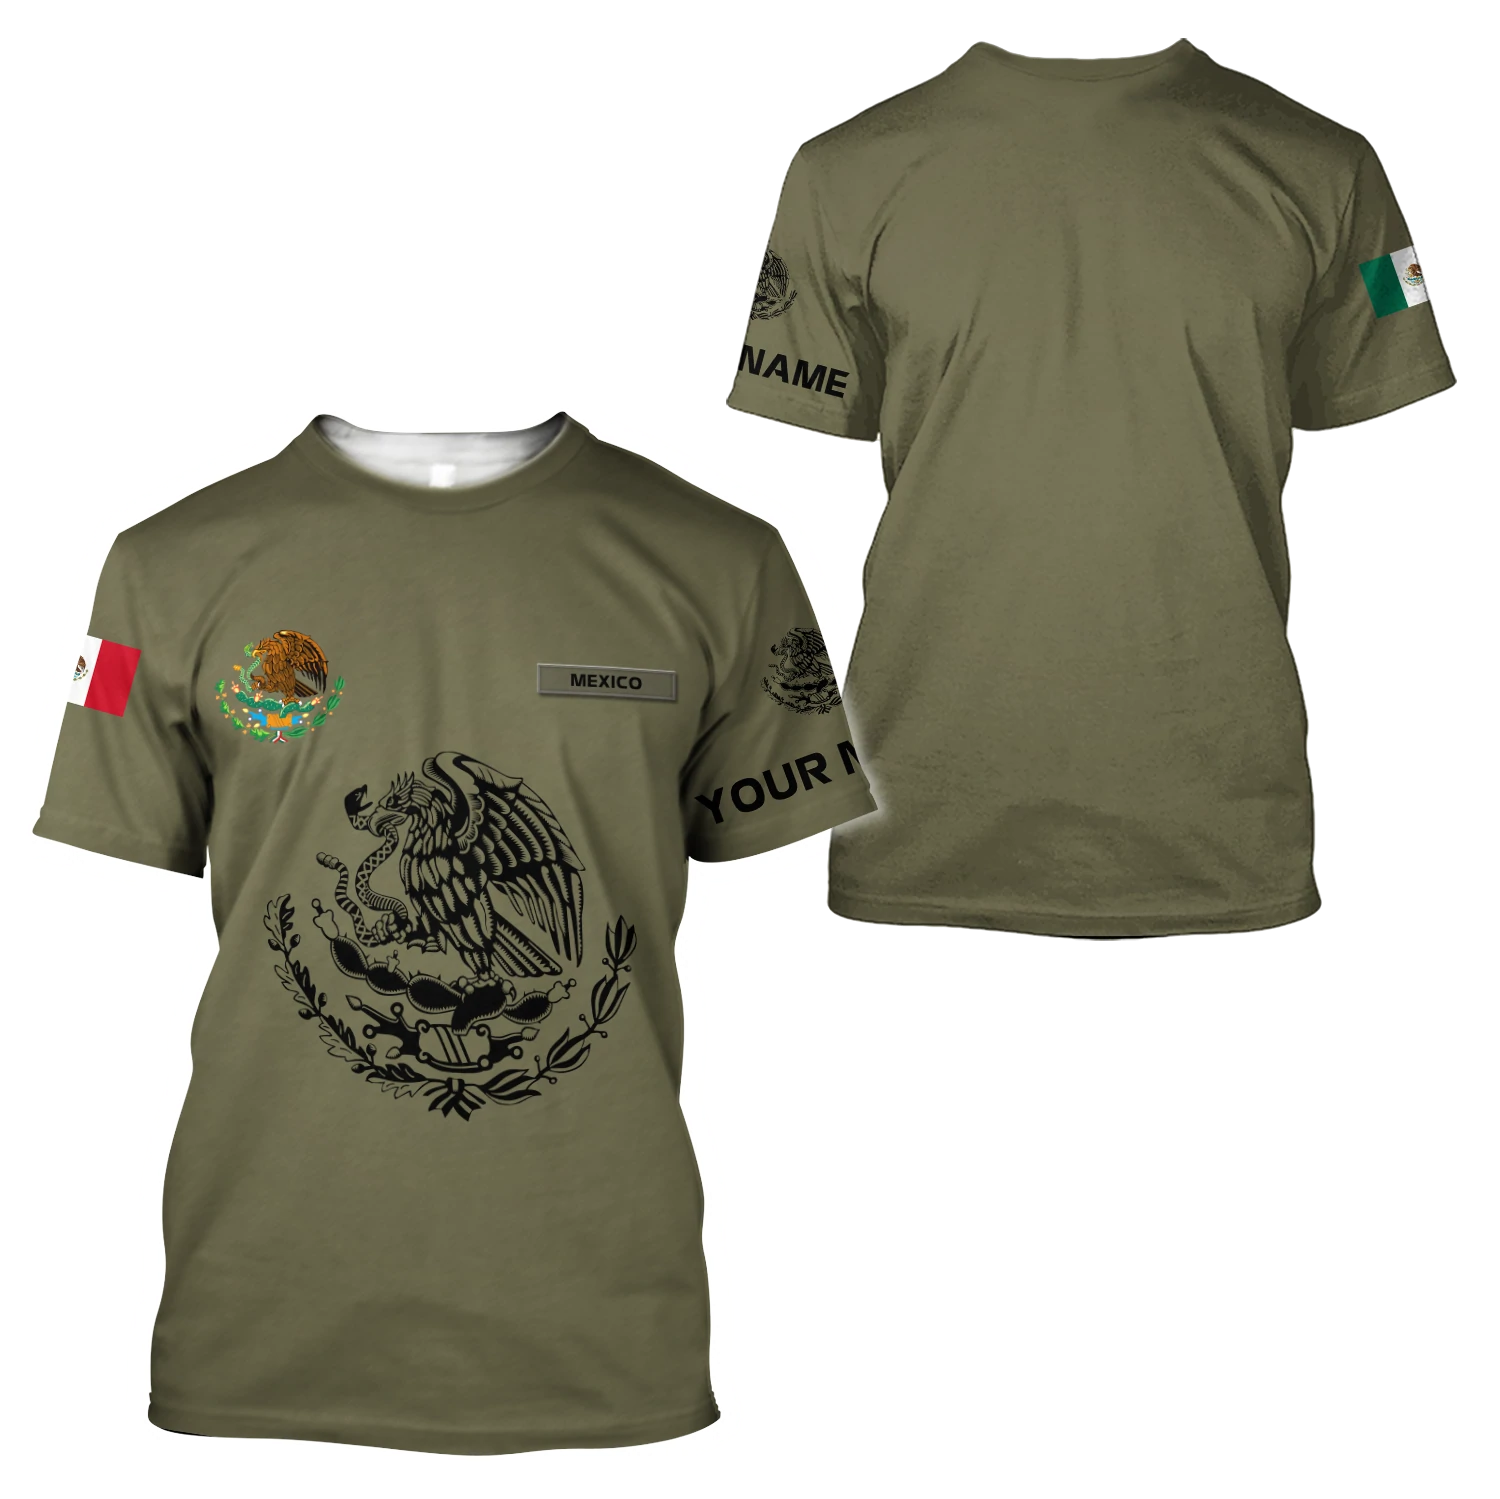 Aztec Day Of The Dead Queen All Over Printed Unisex Shirts/ Mexico Tshirt For Men And Women/ Aztec Mexican Shirt